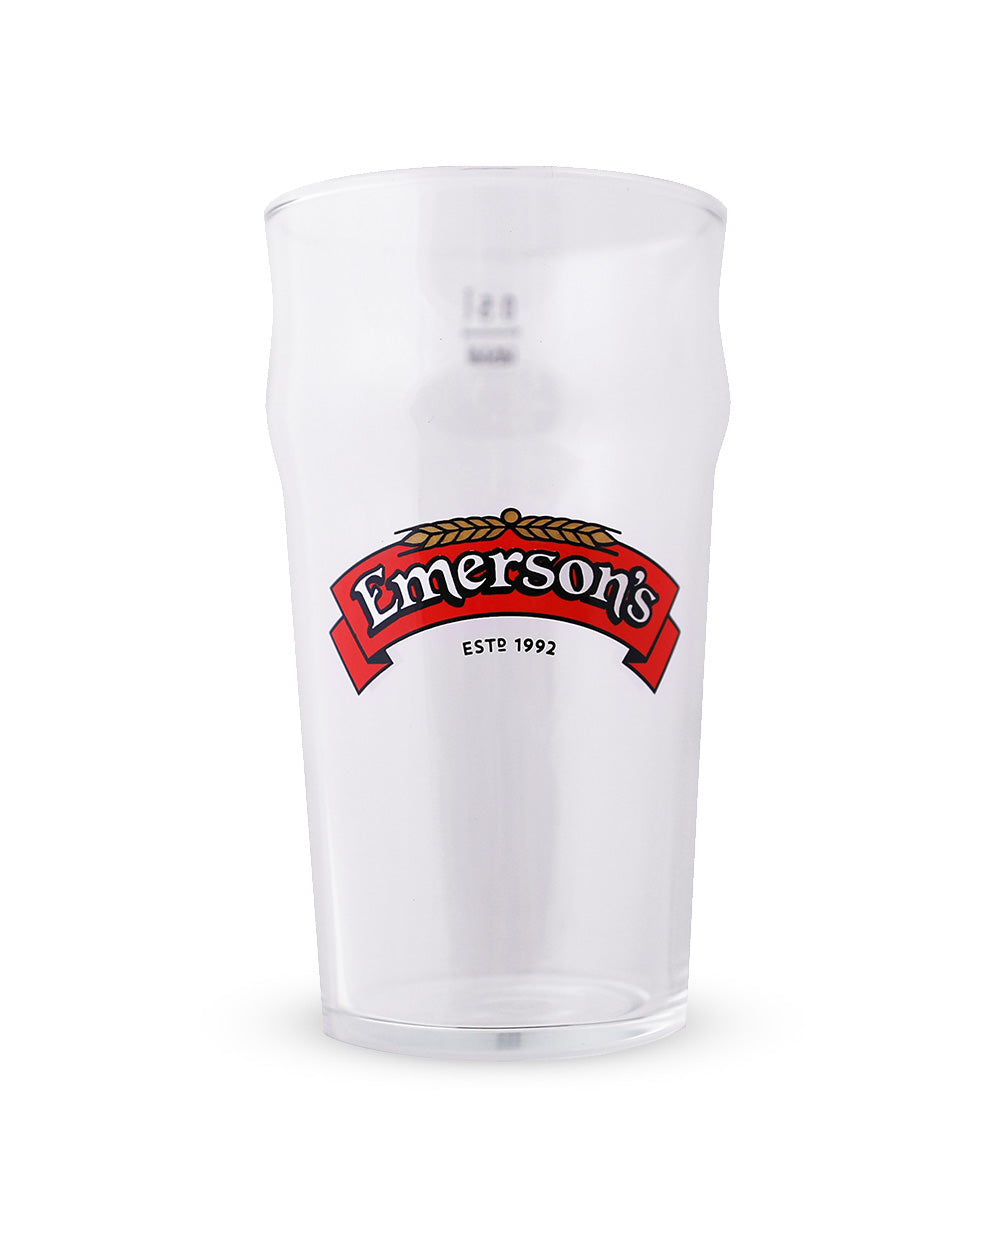 Emerson's Glass 12pk -  Beer Gear Apparel & Merchandise - Speights - Lion Red - VB - Tokyo Dy merch